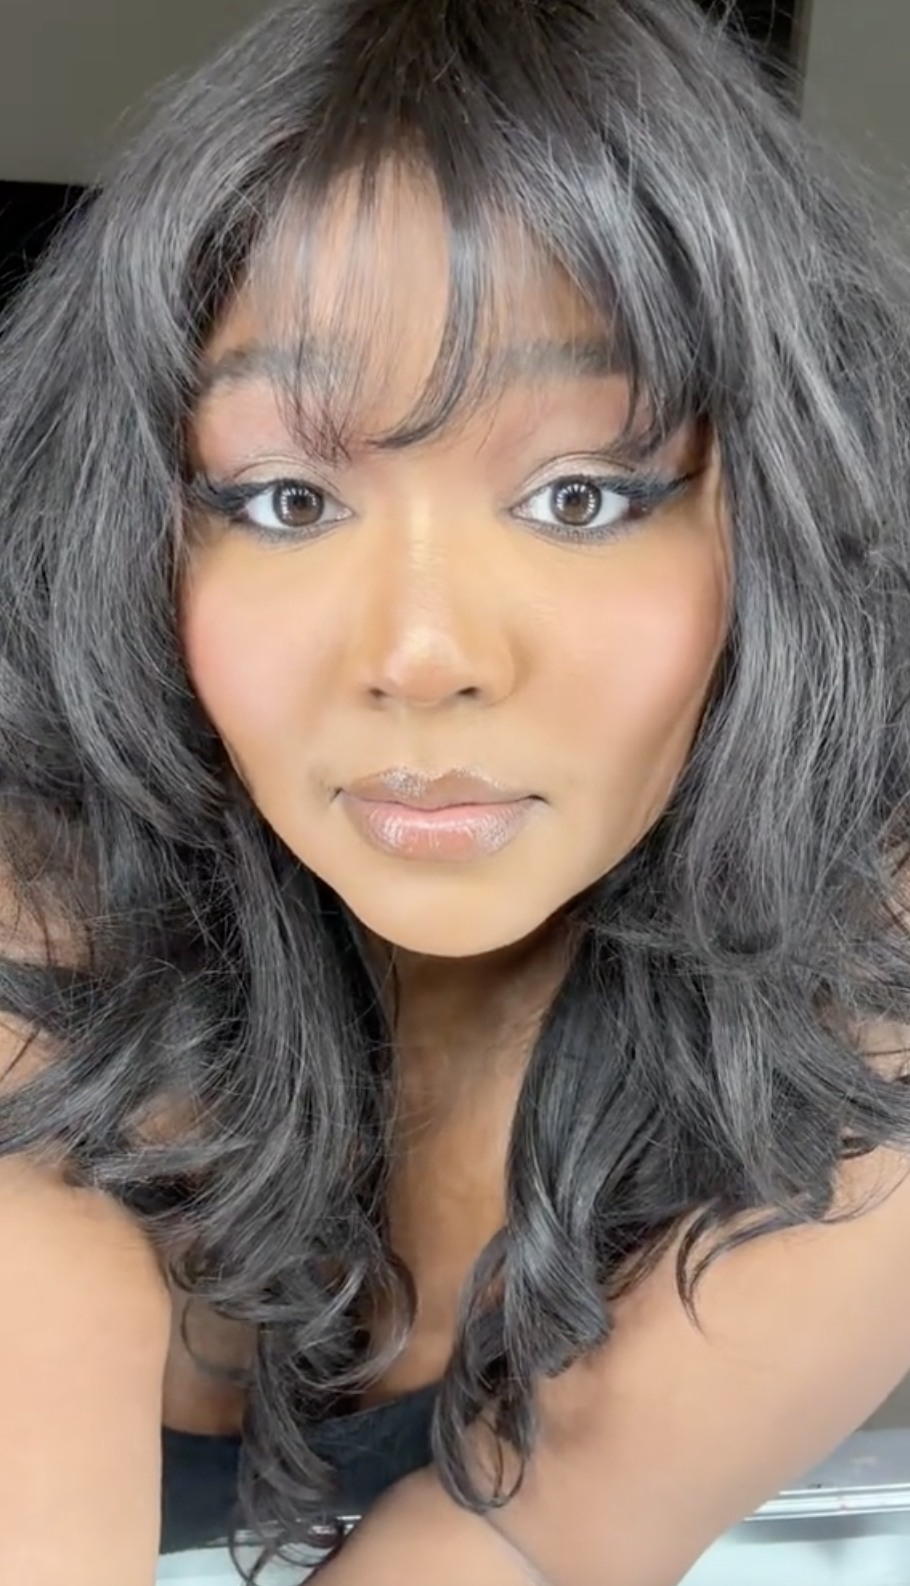 Lizzo Hops on the Wolf Haircut Trend, Shows Off New 'Do